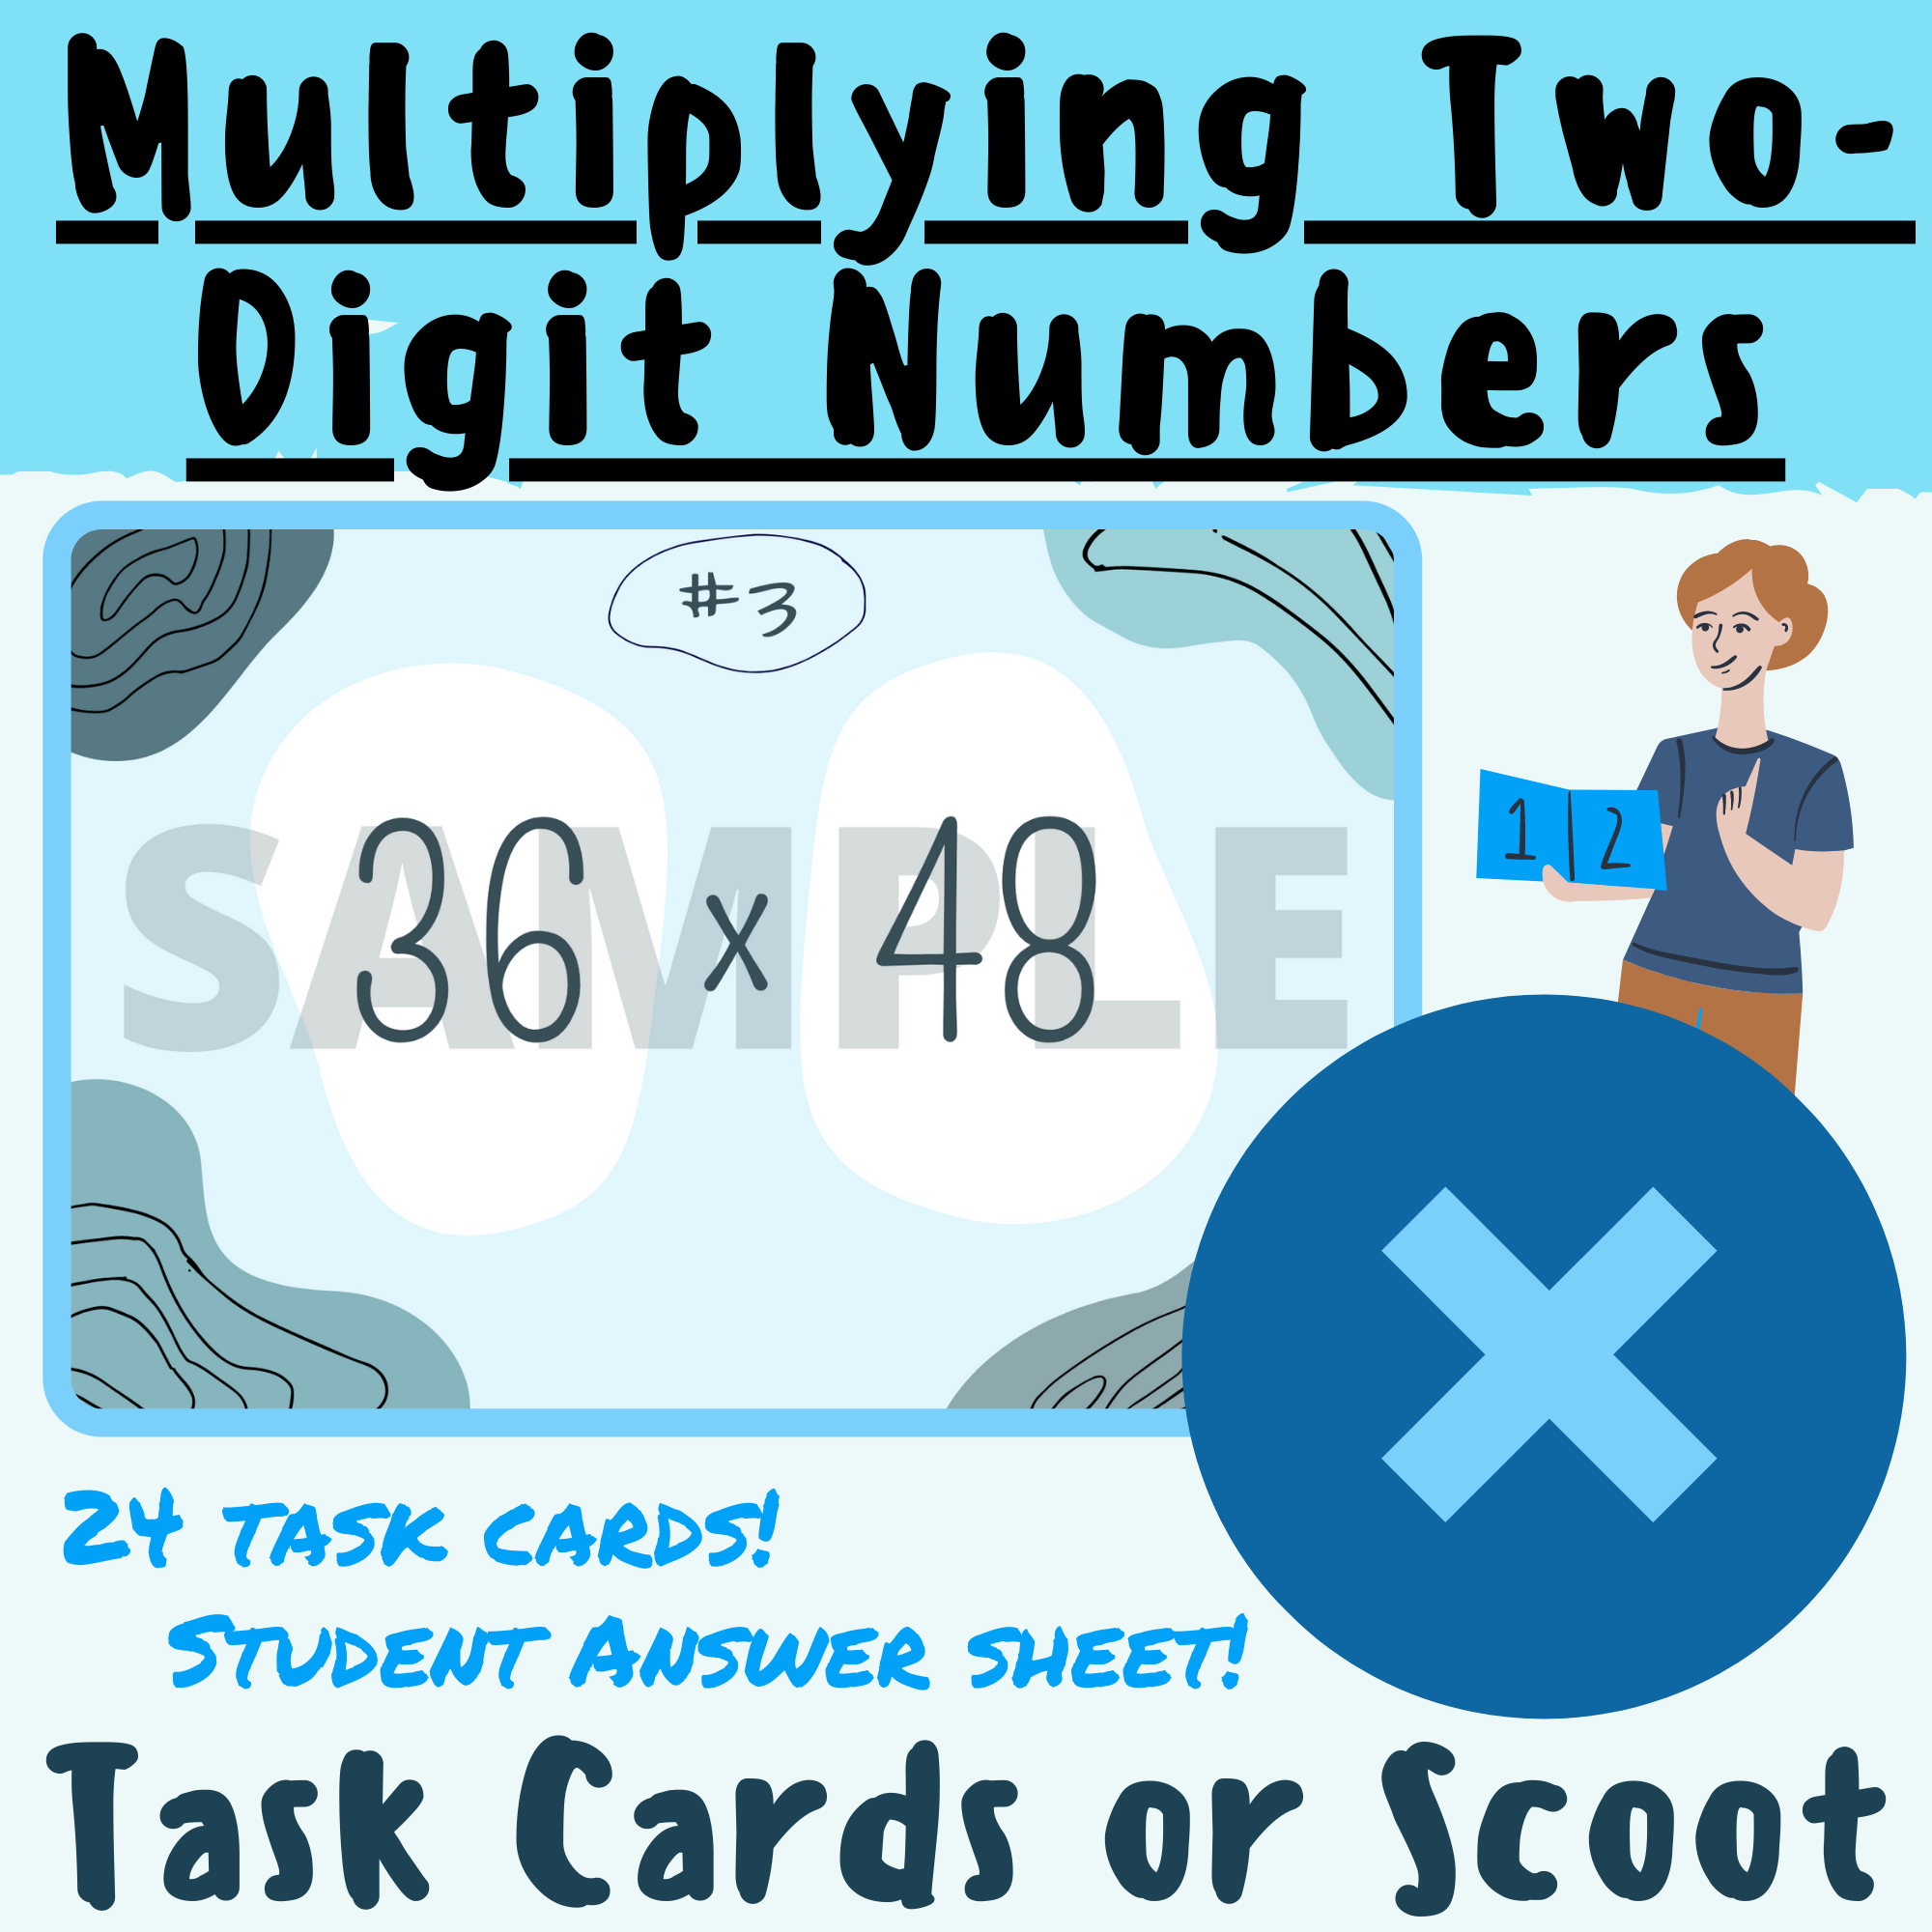 Multiplying Two-Digit Numbers Task Cards or Scoot Game; For K-5 Teachers and Students in the Math Classroom